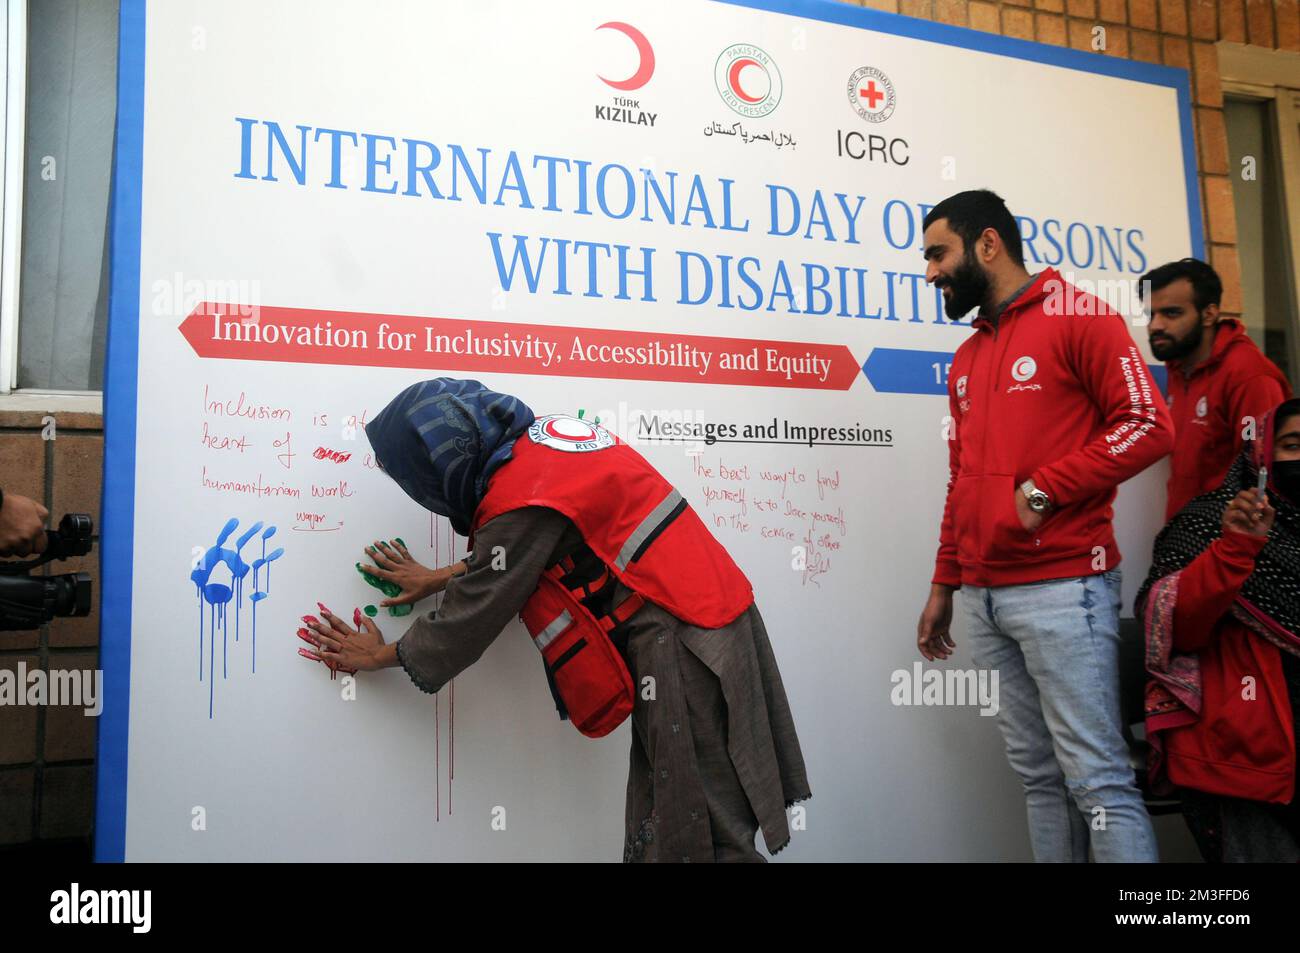 ISLAMABAD, PAKISTAN "International Day of Persons with Disabilities" was observed around the world today, which aims to highlight the problems faced b Stock Photo